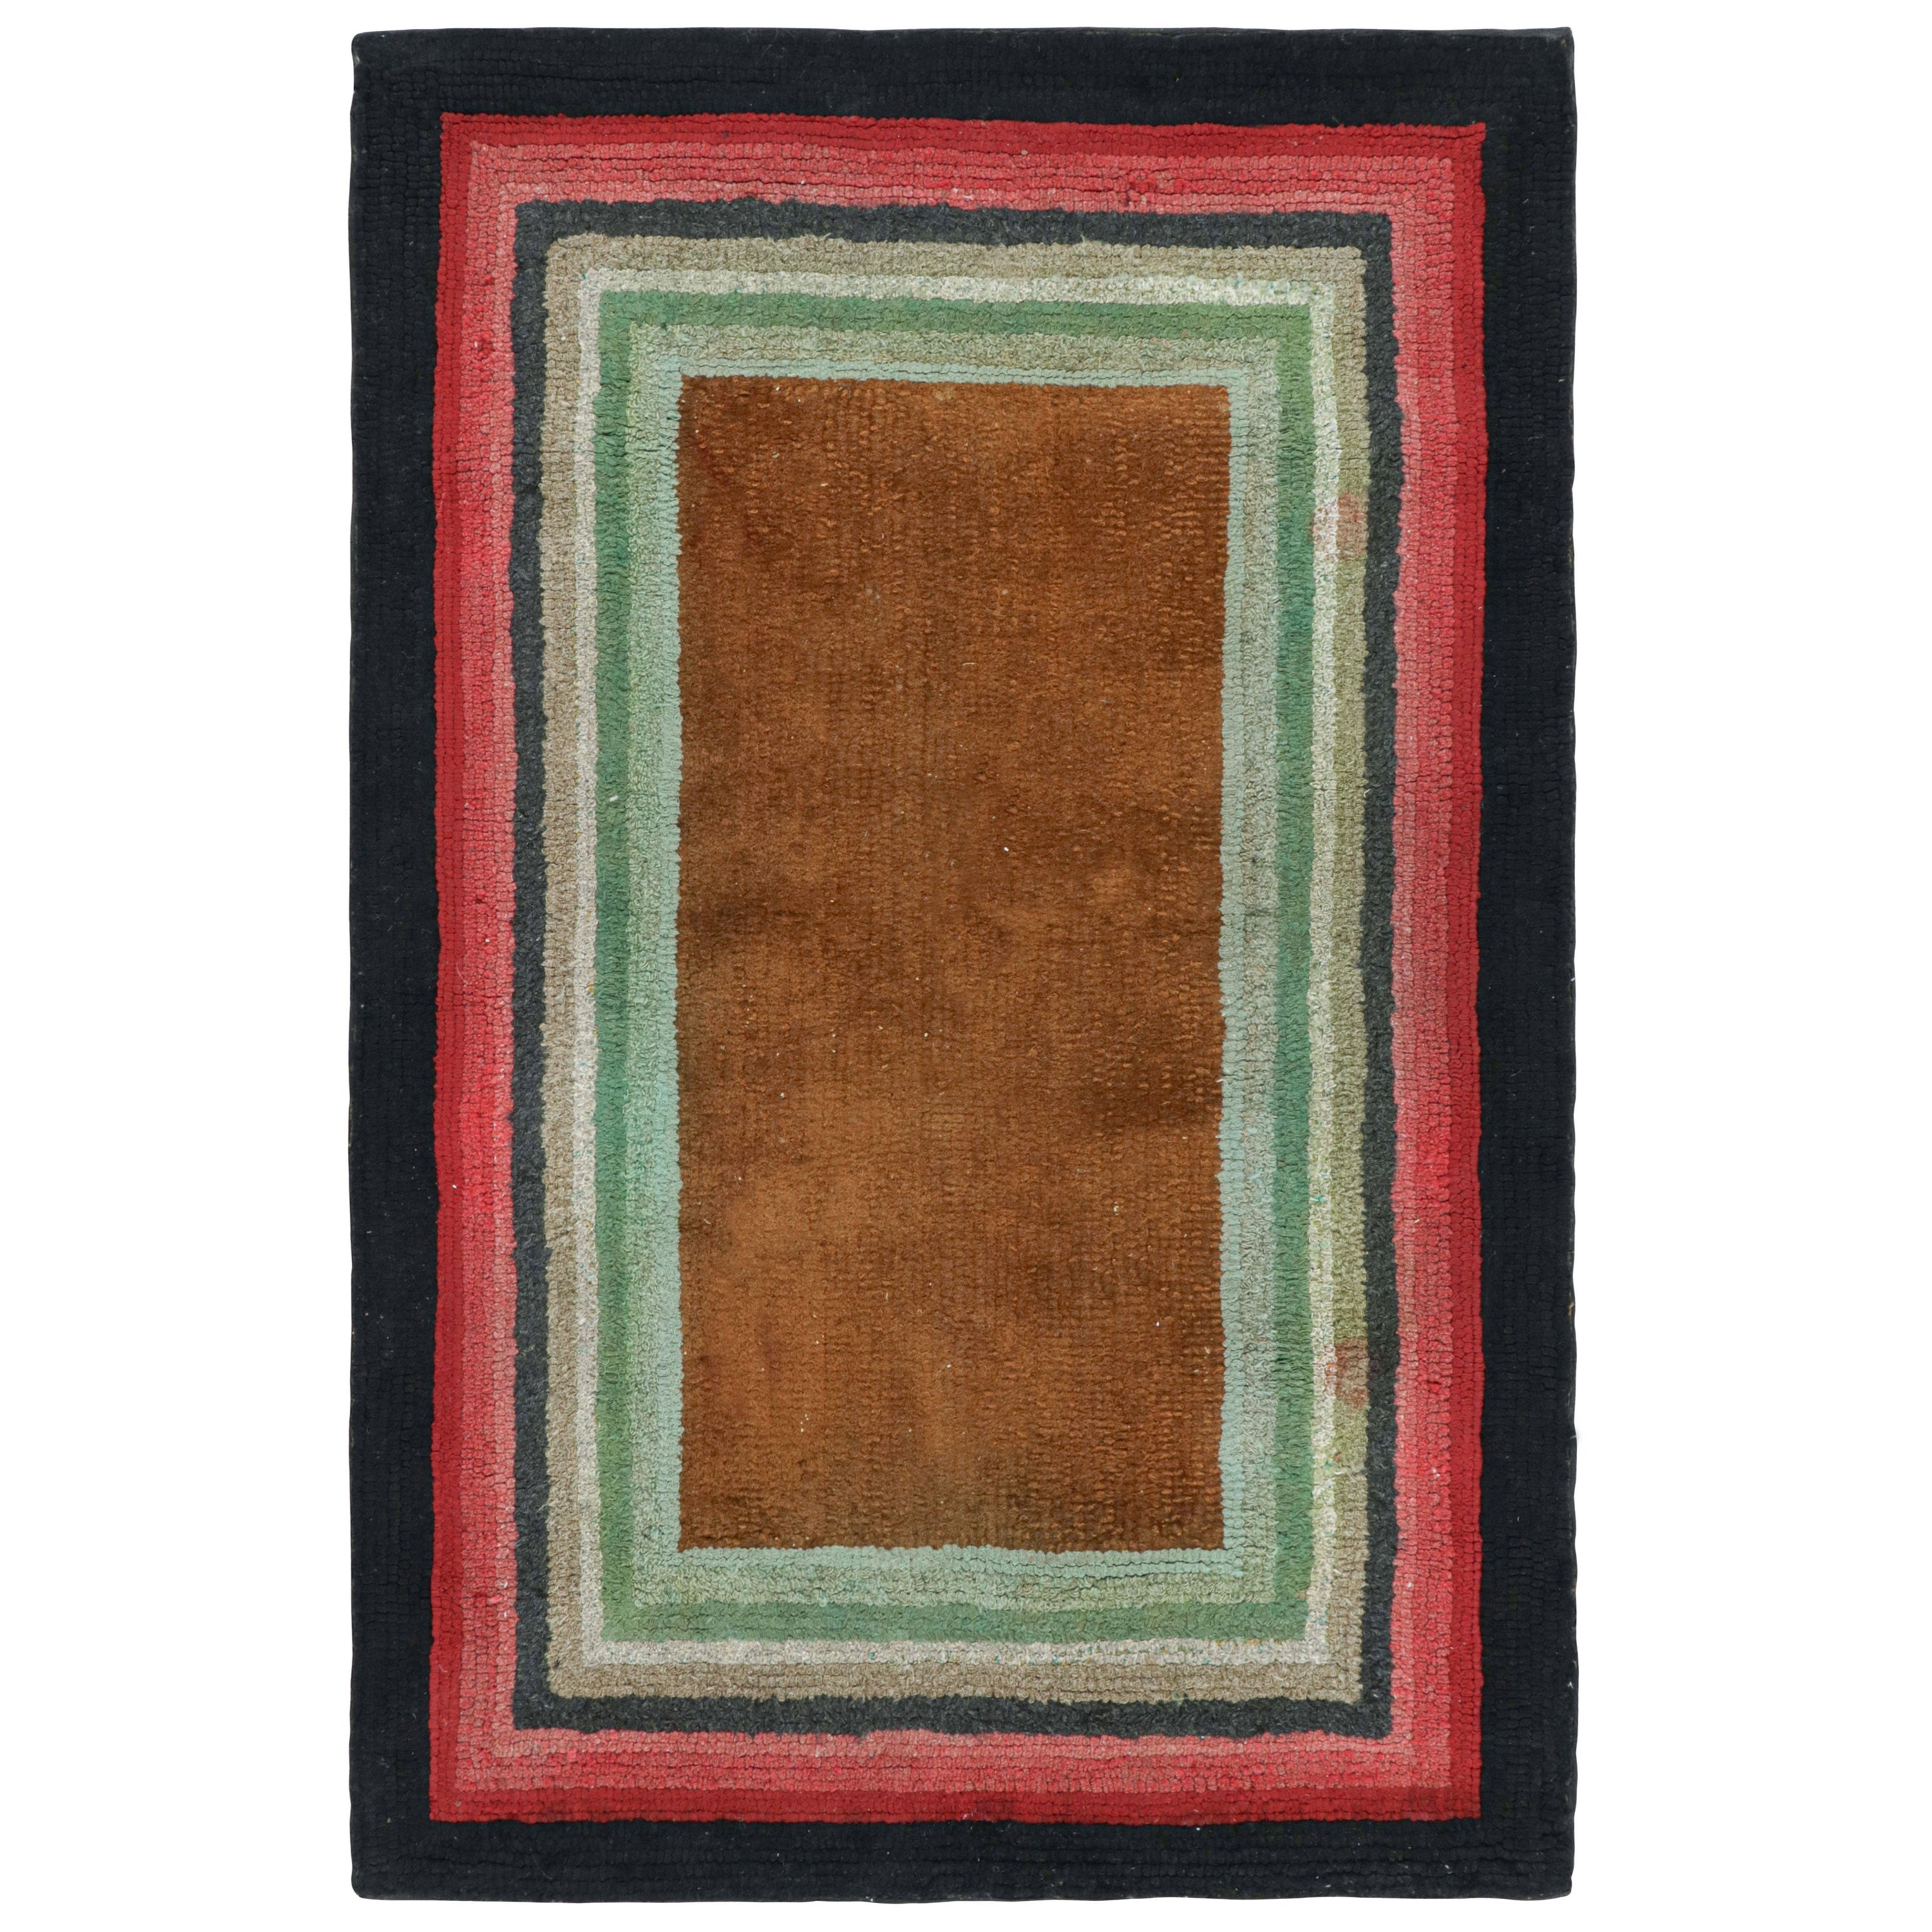 Antique Hooked Rug with Brown Open Field and Geometric Borders, from Rug & Kilim